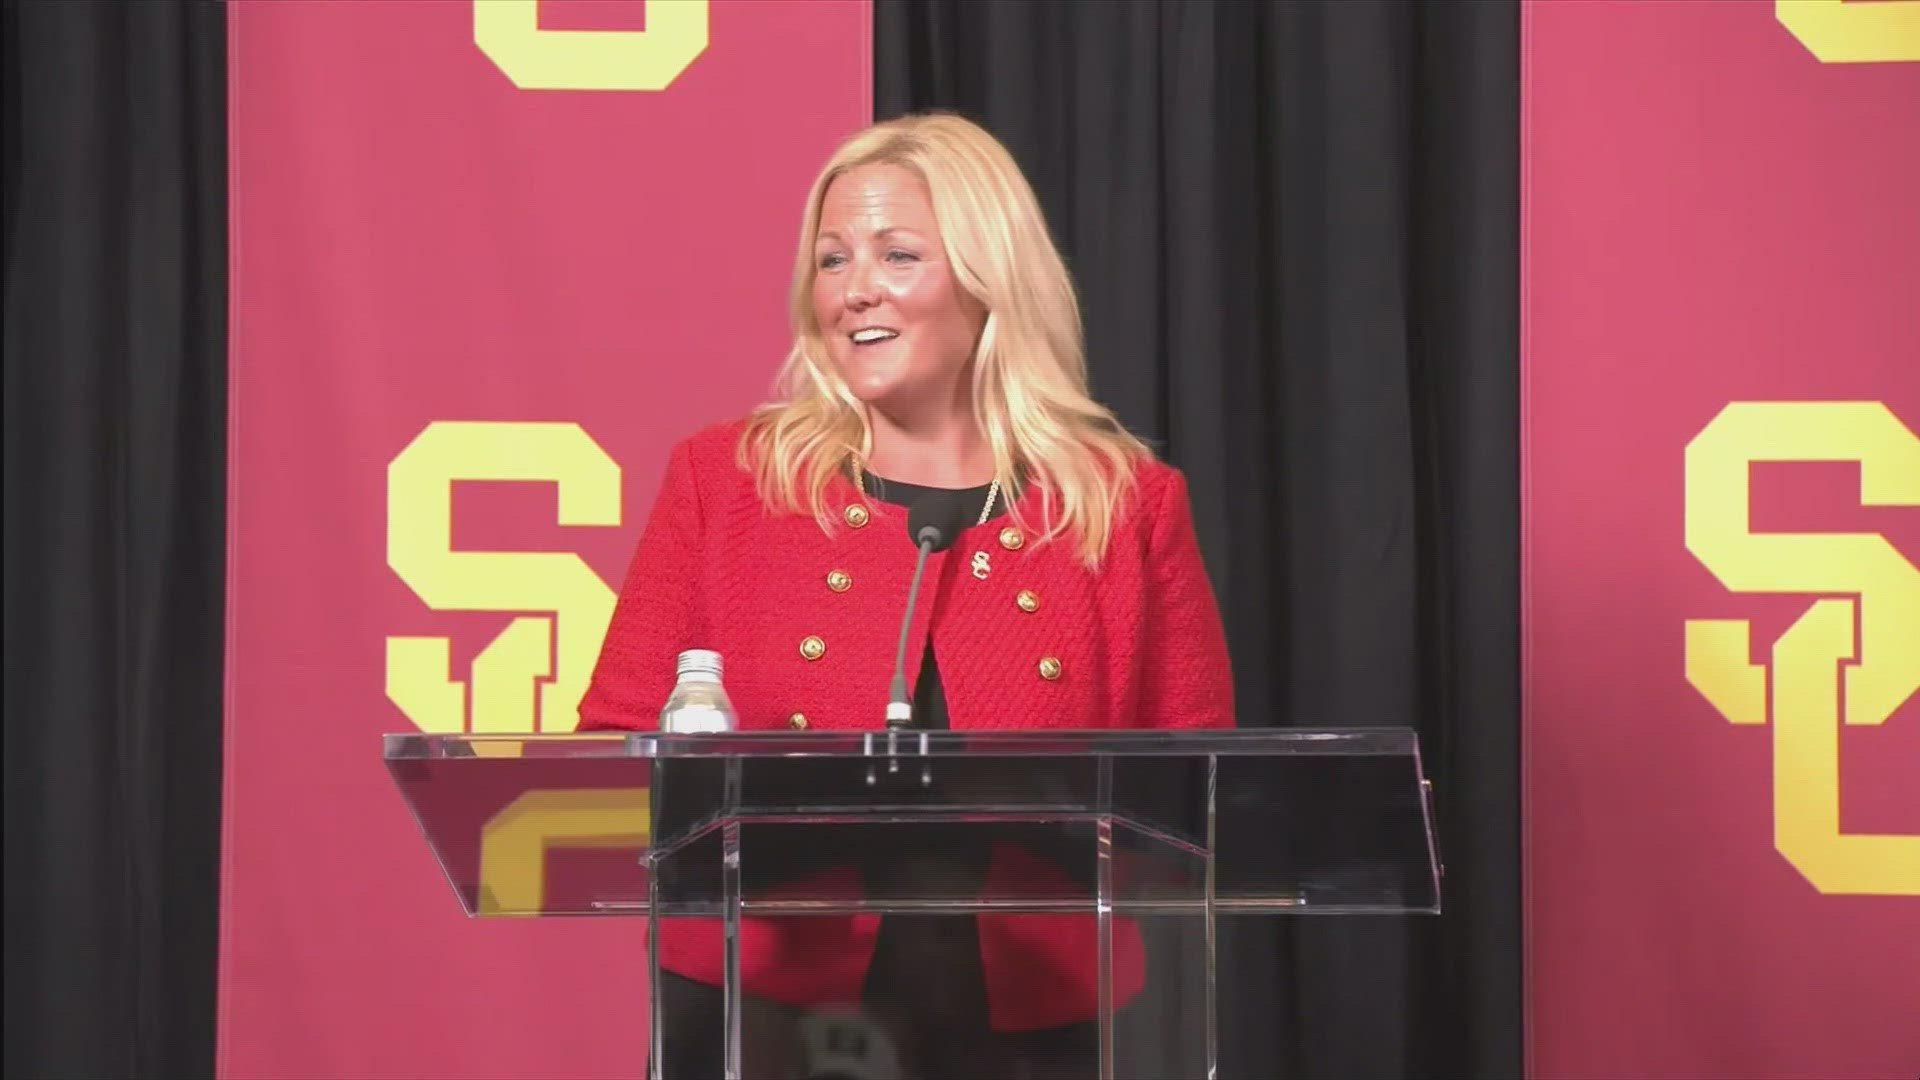 Jennifer Cohen is being hired as Southern California's athletic director after seven years in the same post at the University of Washington, the school announced.